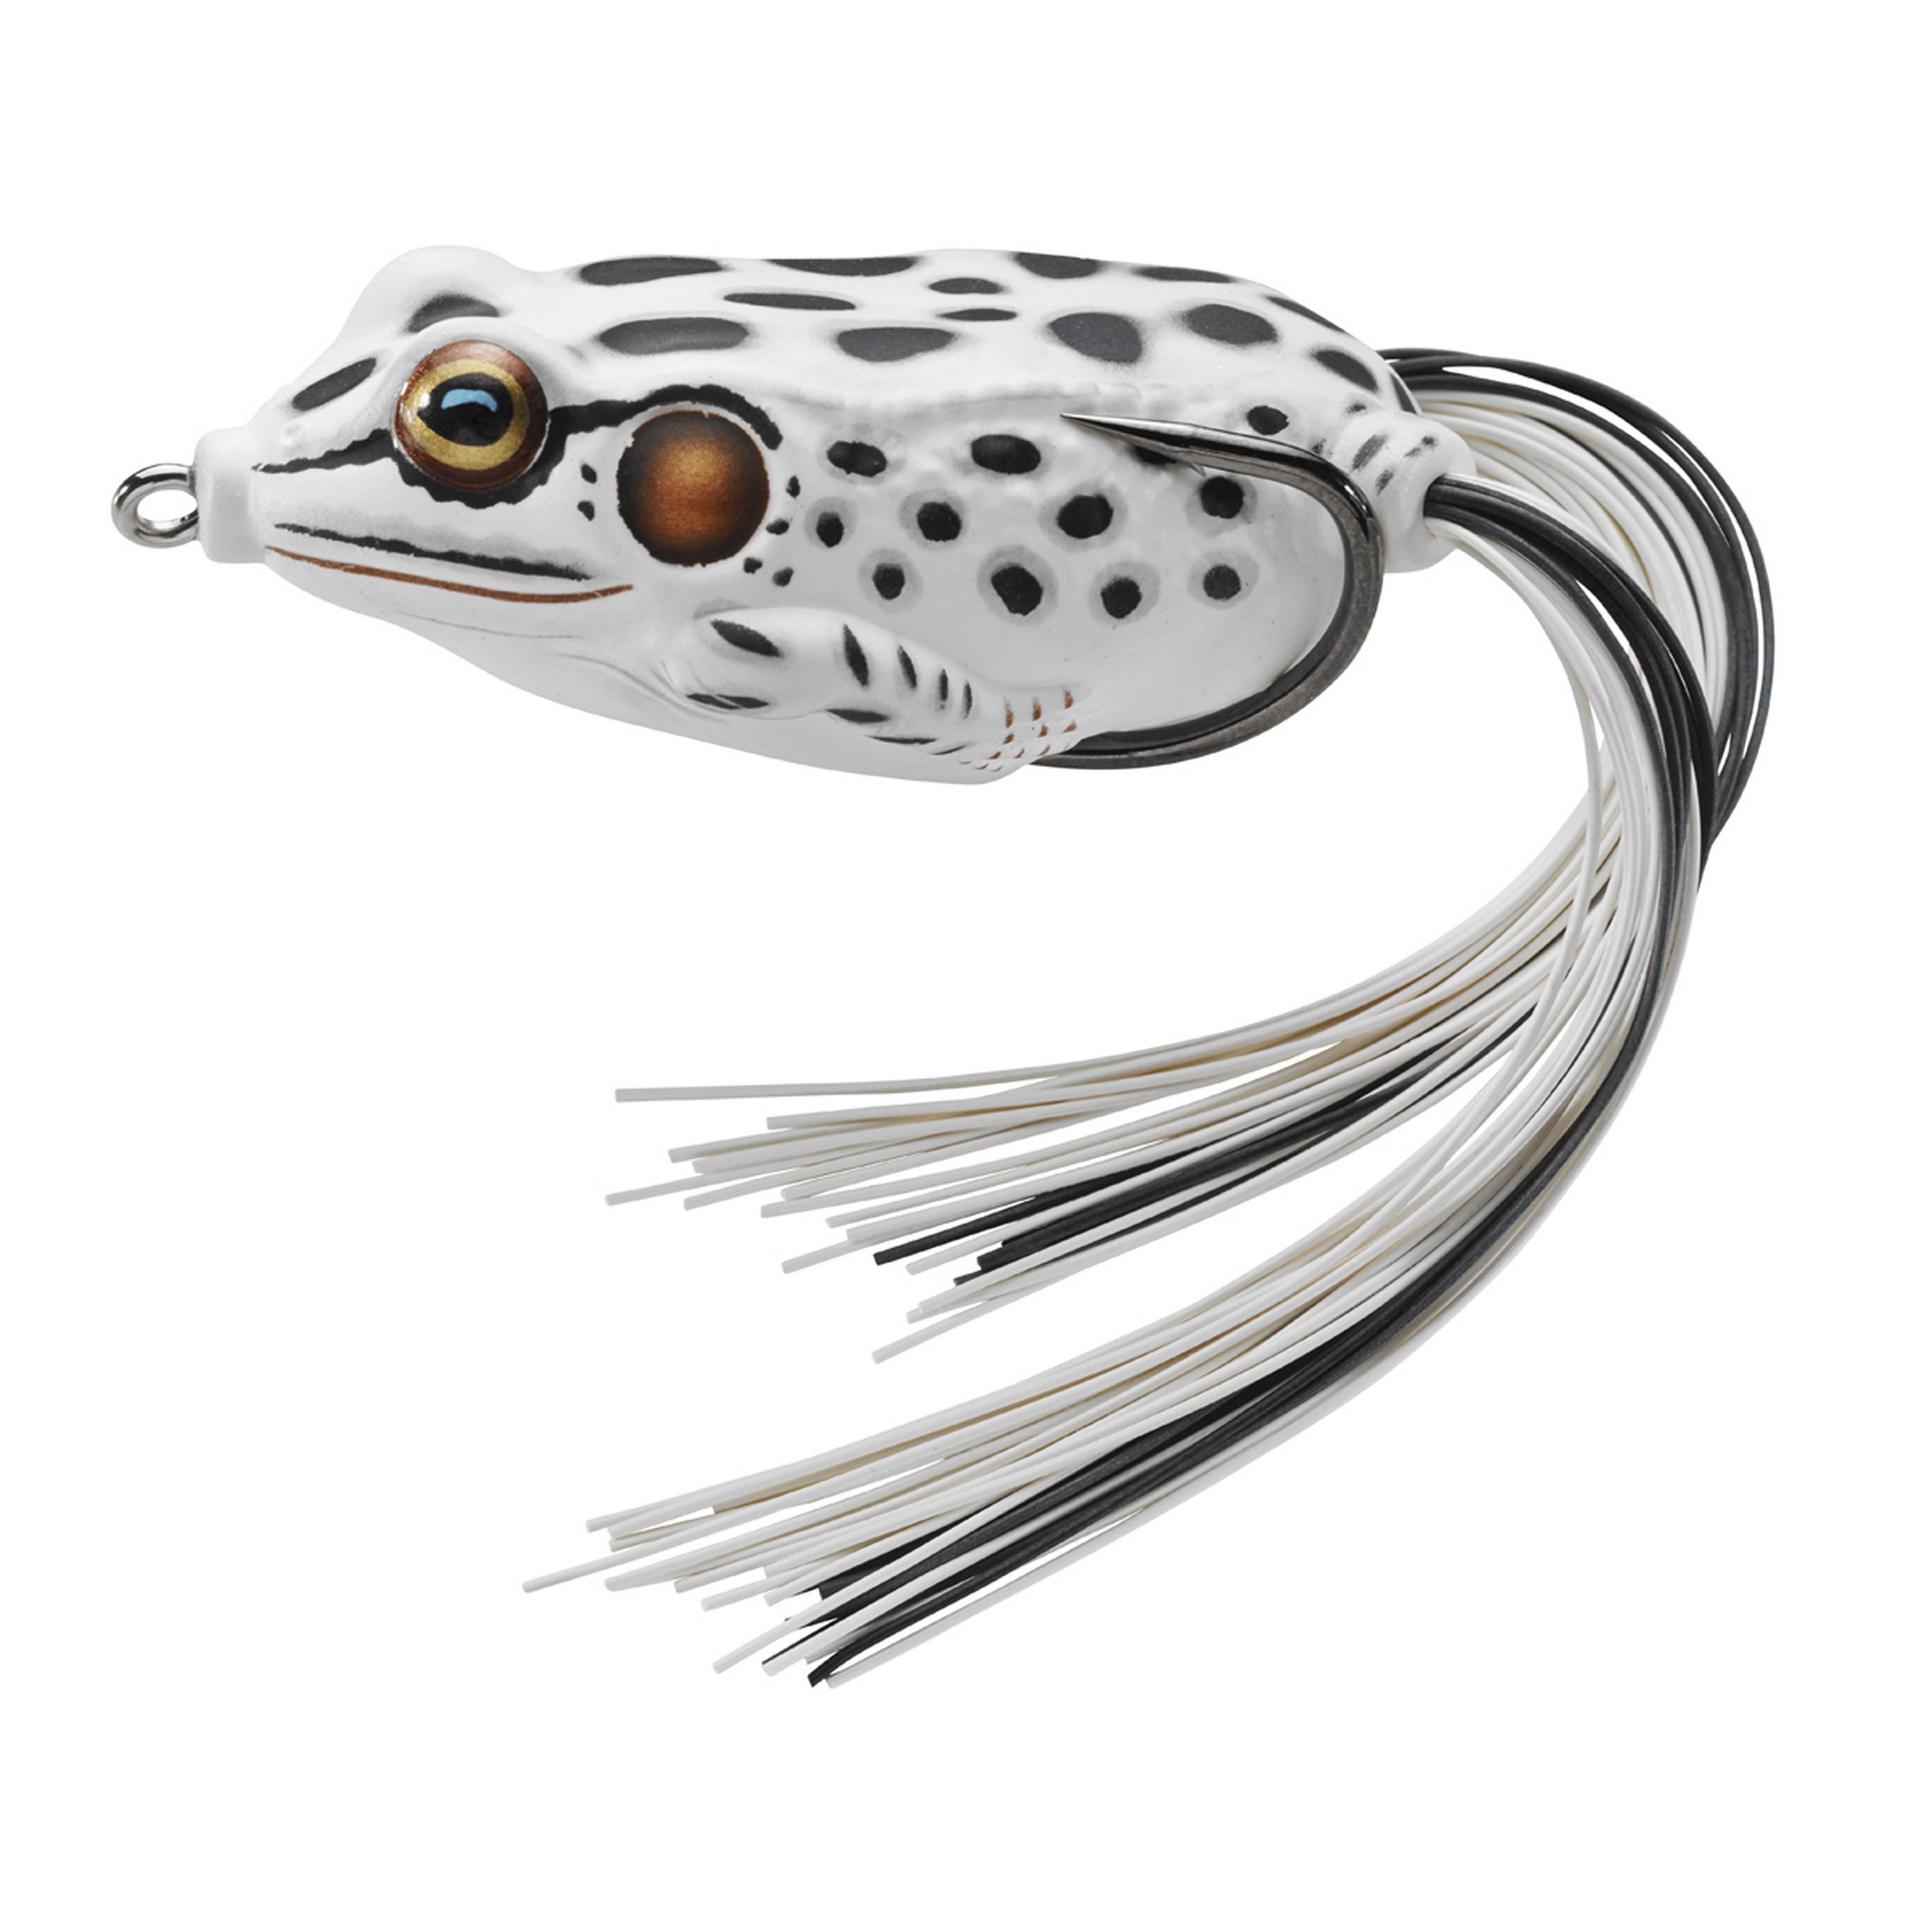 Live Target Frog Hollow Body,albino/white,2/O FGH65T516